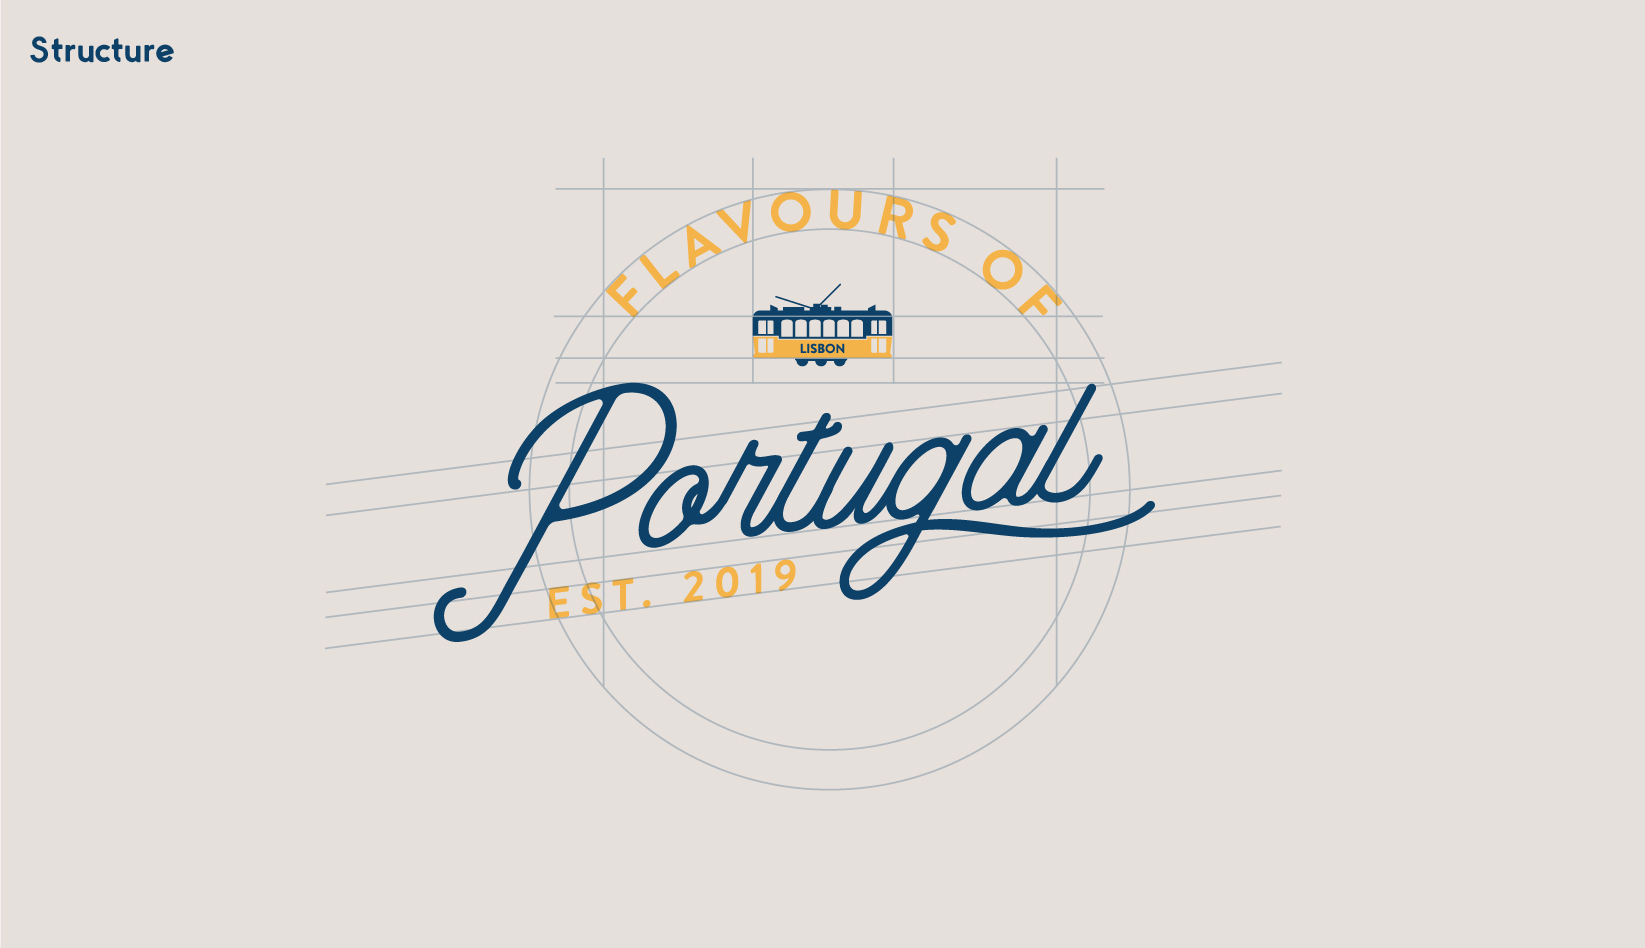 flavours of portugal